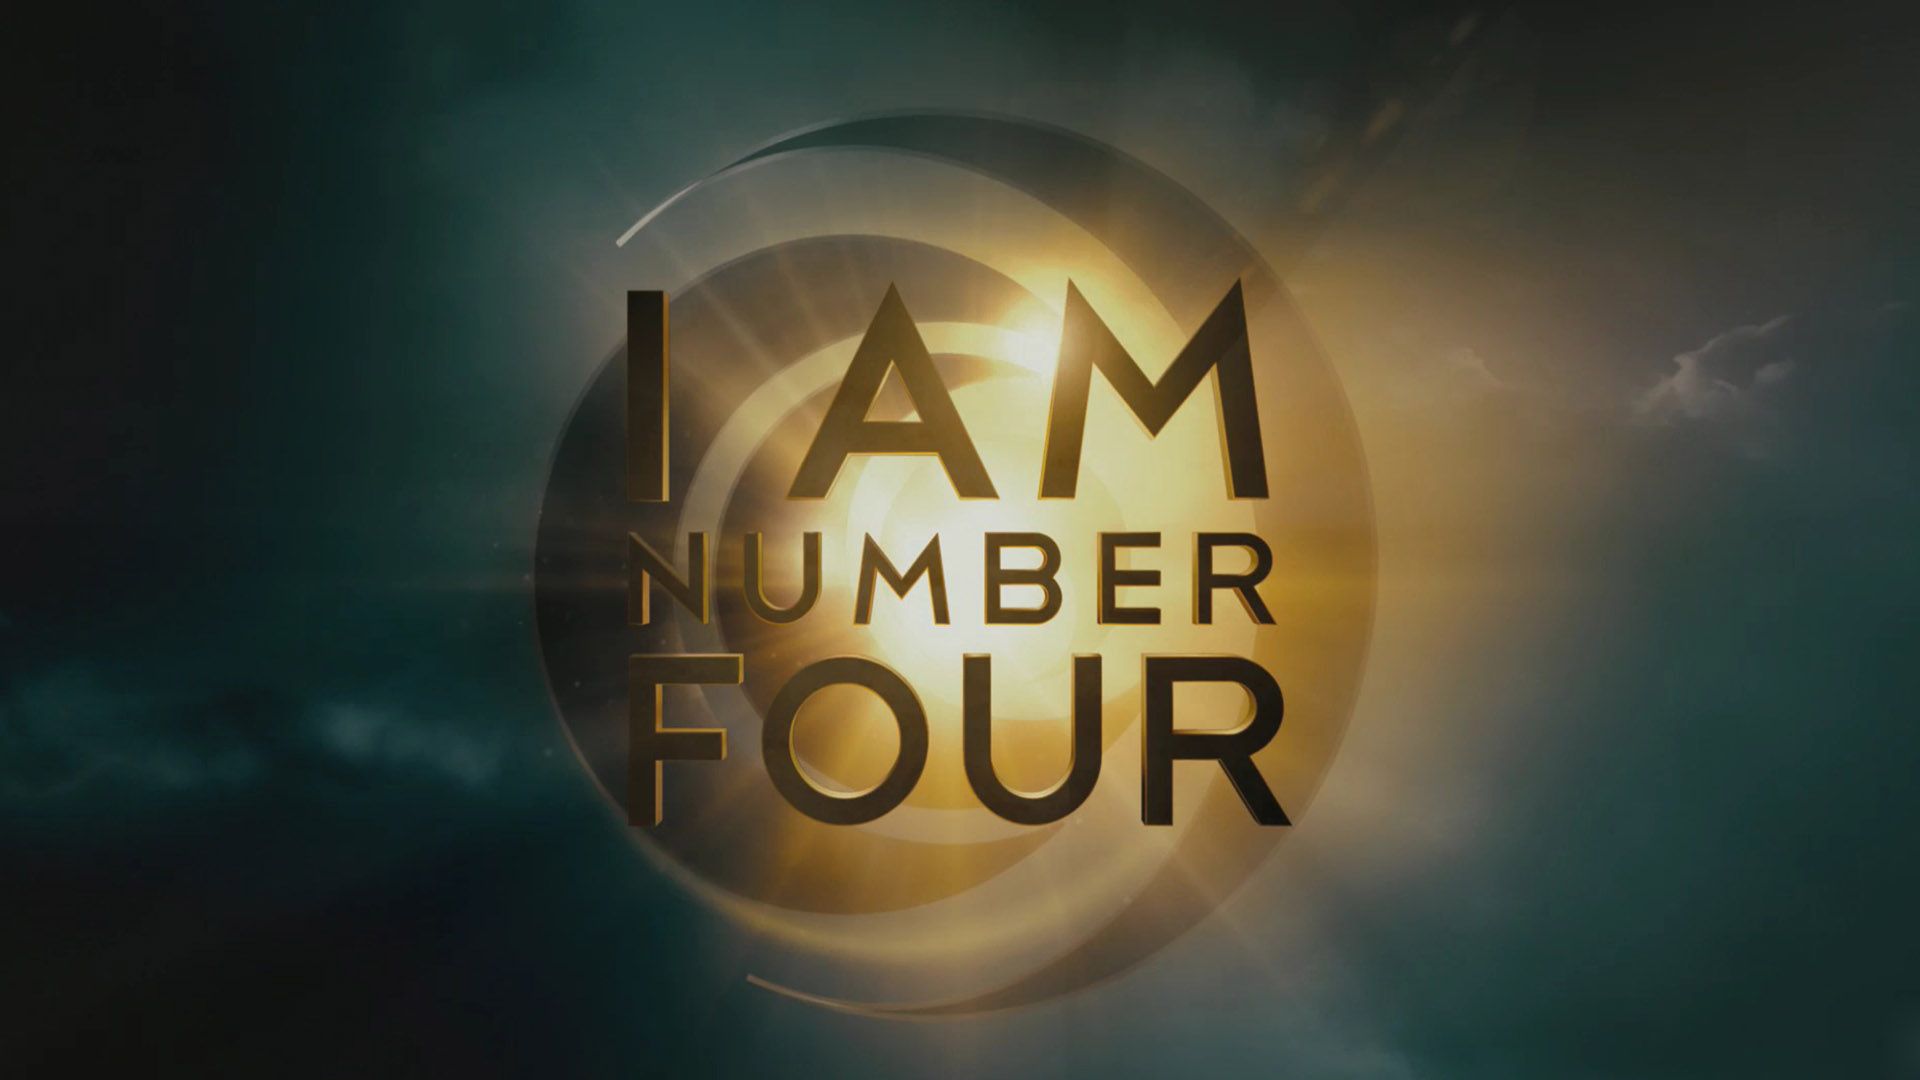 the number 4 movie